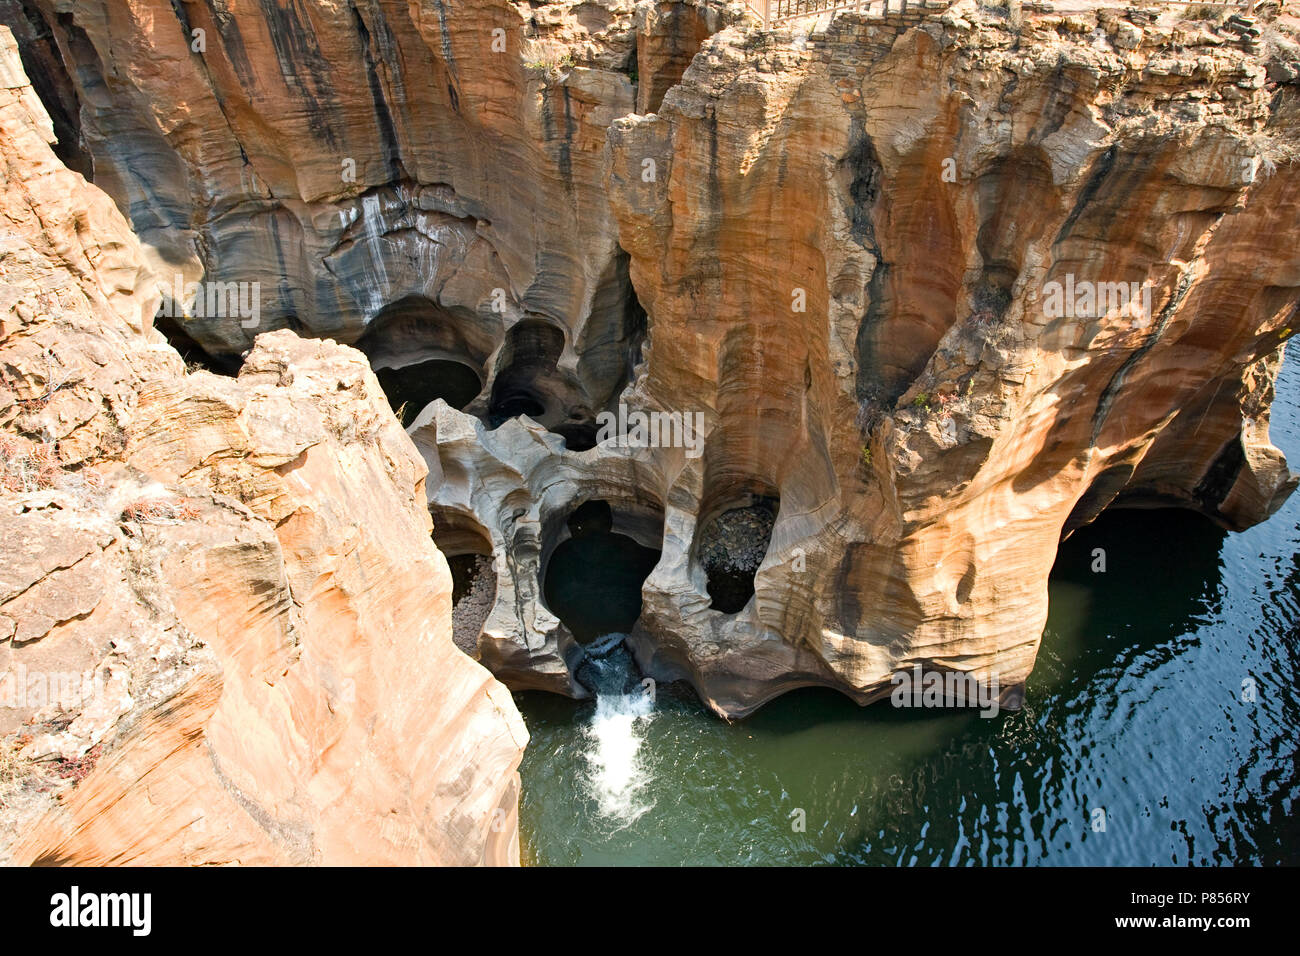 Bourke's Luck Potholes, Blyde River Canyon, South-Africa / Zuid-Afrika Stock Photo